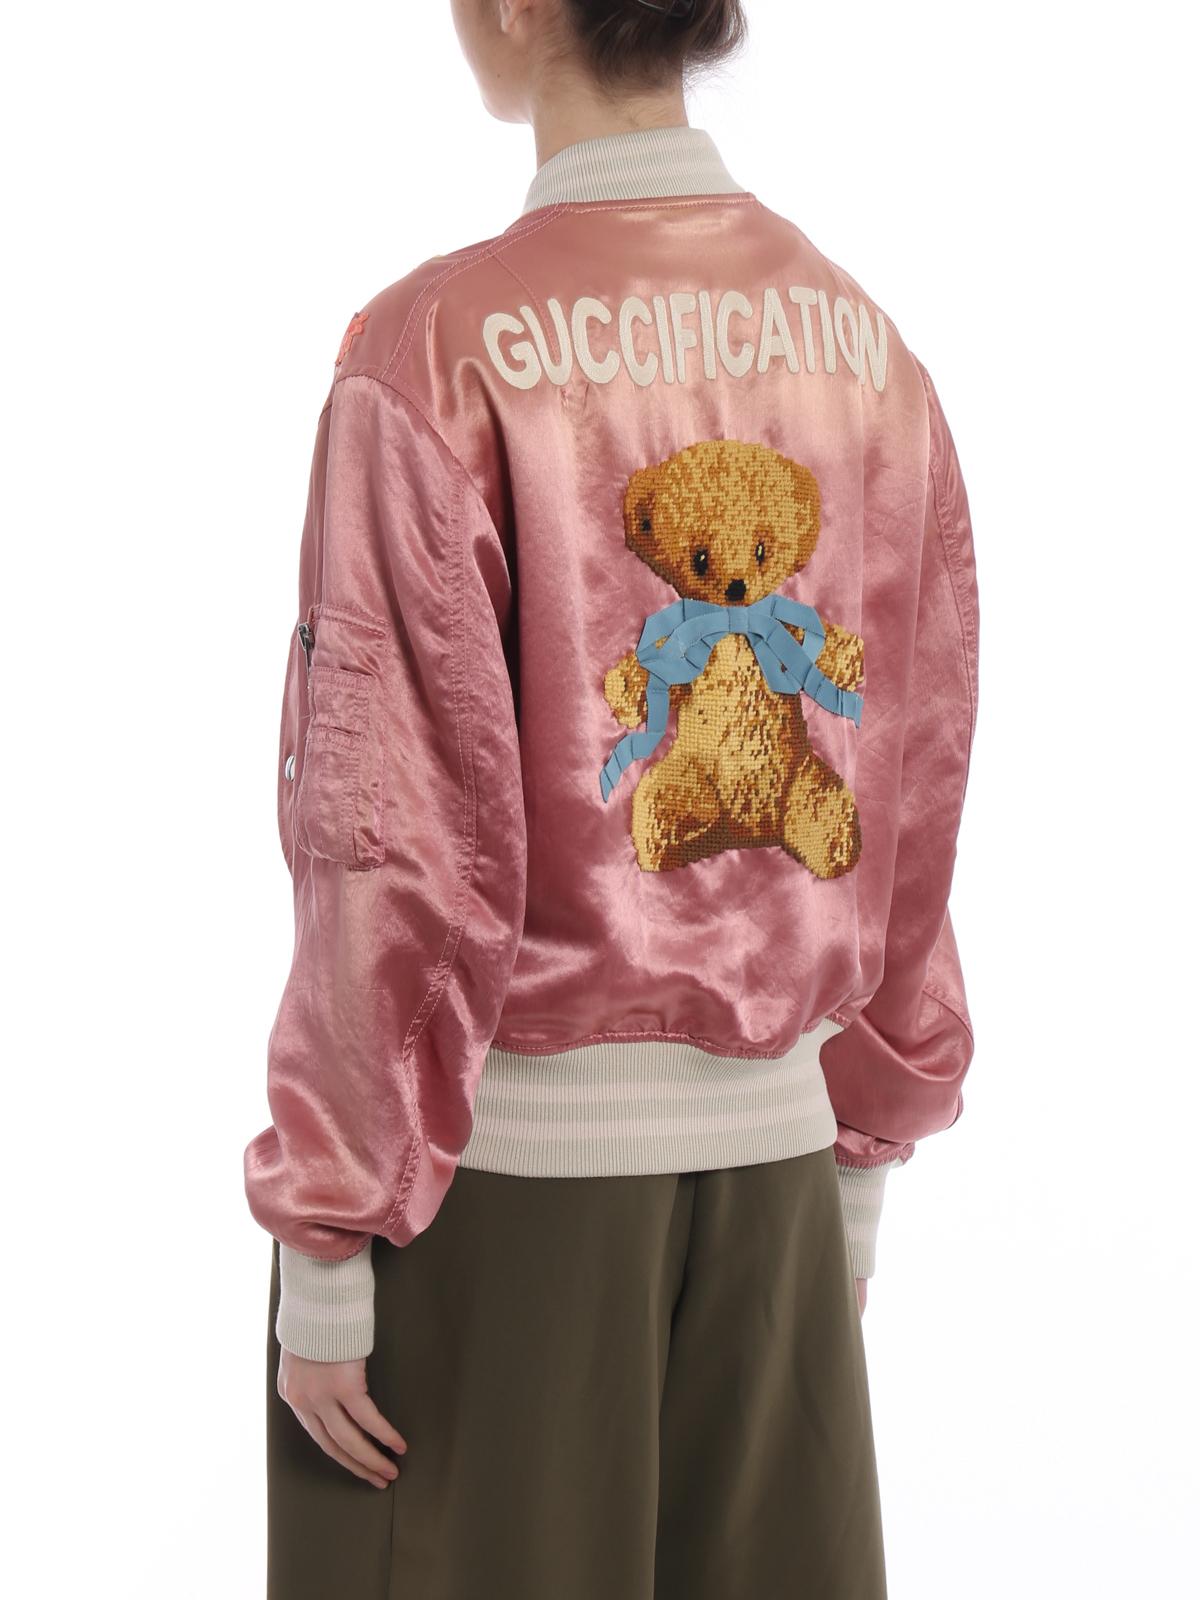 A pearl for genuine collectors!
A rare find Gucci 'Guccification' silk bomber jacket with 'flora' embroidery and teddy bear appliqué at back.
Boutique price 4,000$ 
Size mark 40 IT. Condition is pristine.